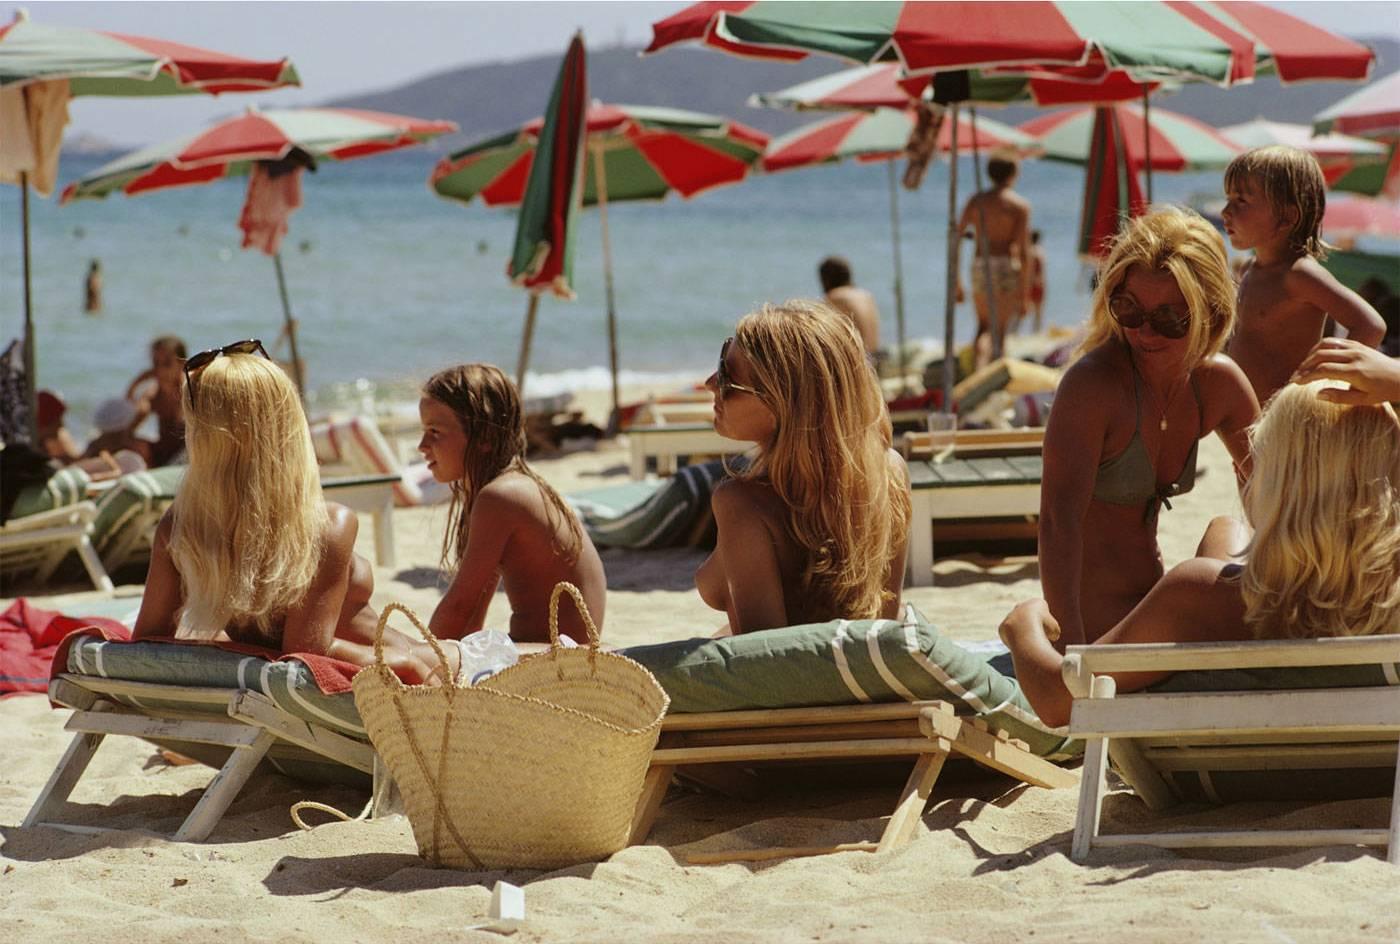 Saint Tropez Beach, 1971
Chromogenic Lambda print
Estate stamped and hand numbered edition of 150 with certificate of authenticity from the estate.

The beach at Saint-Tropez, on the French Riviera, August 1971. 

Slim Aarons (1916-2006) worked